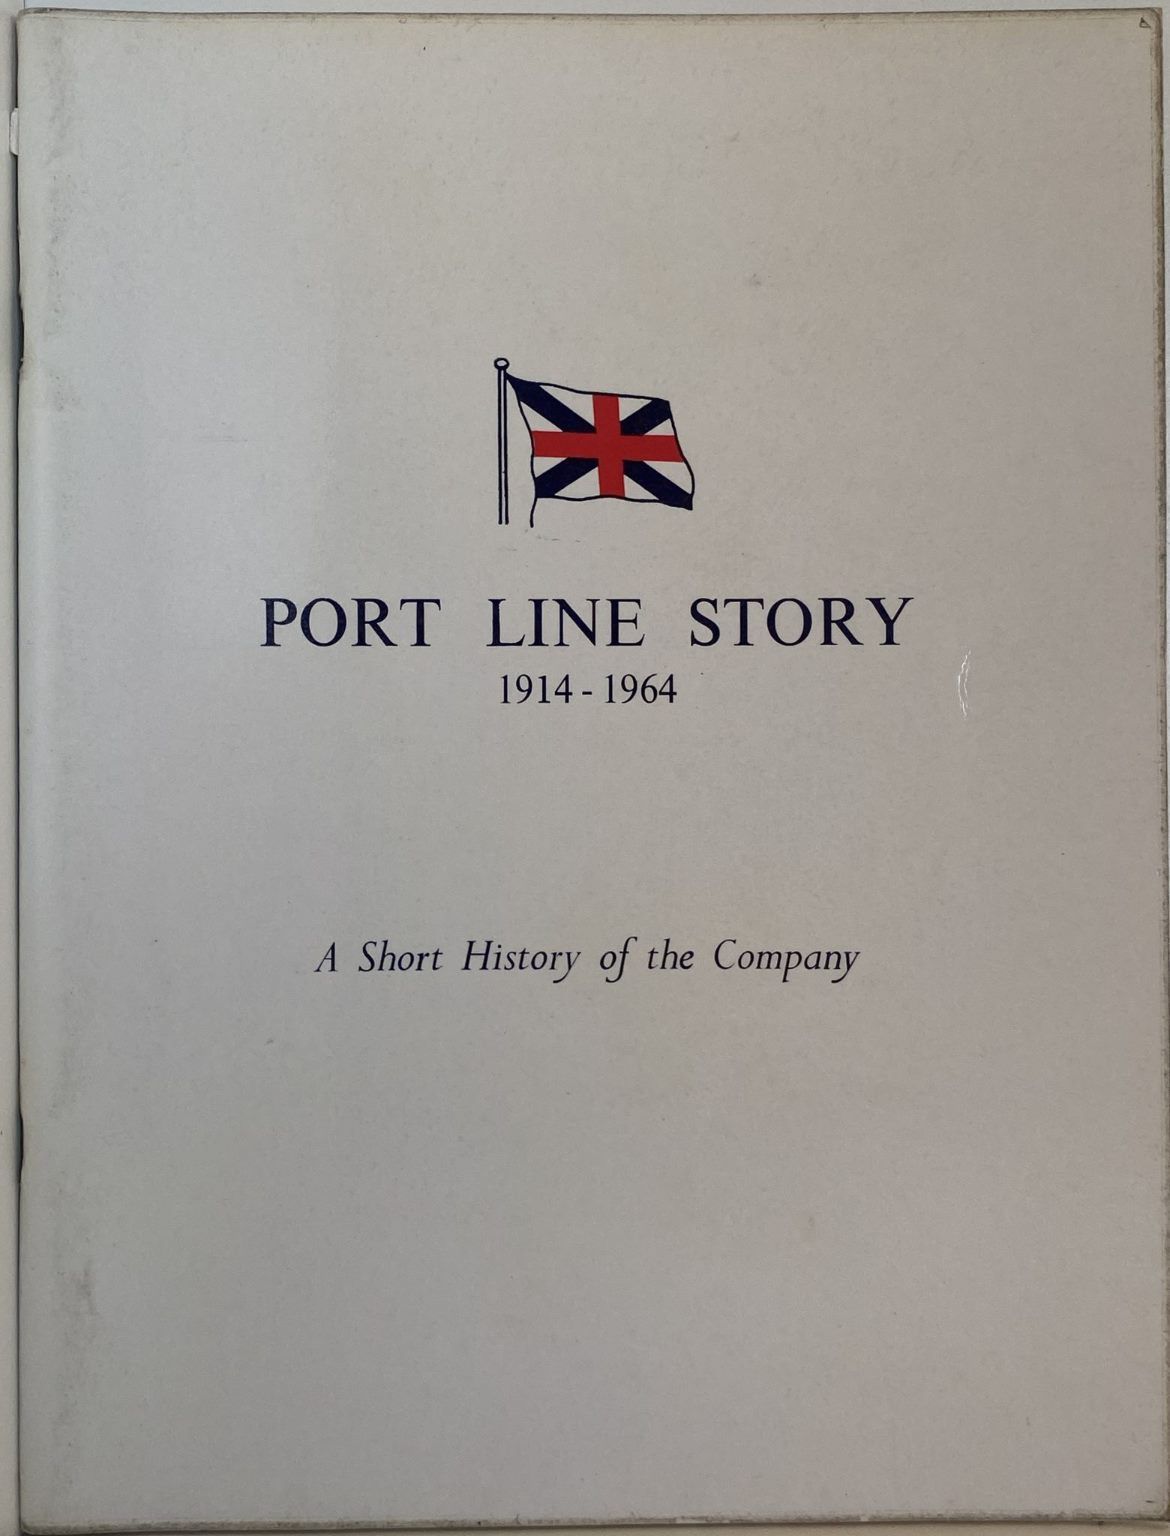 PORT LINE STORY 1914-1964 : A Short History of the Company